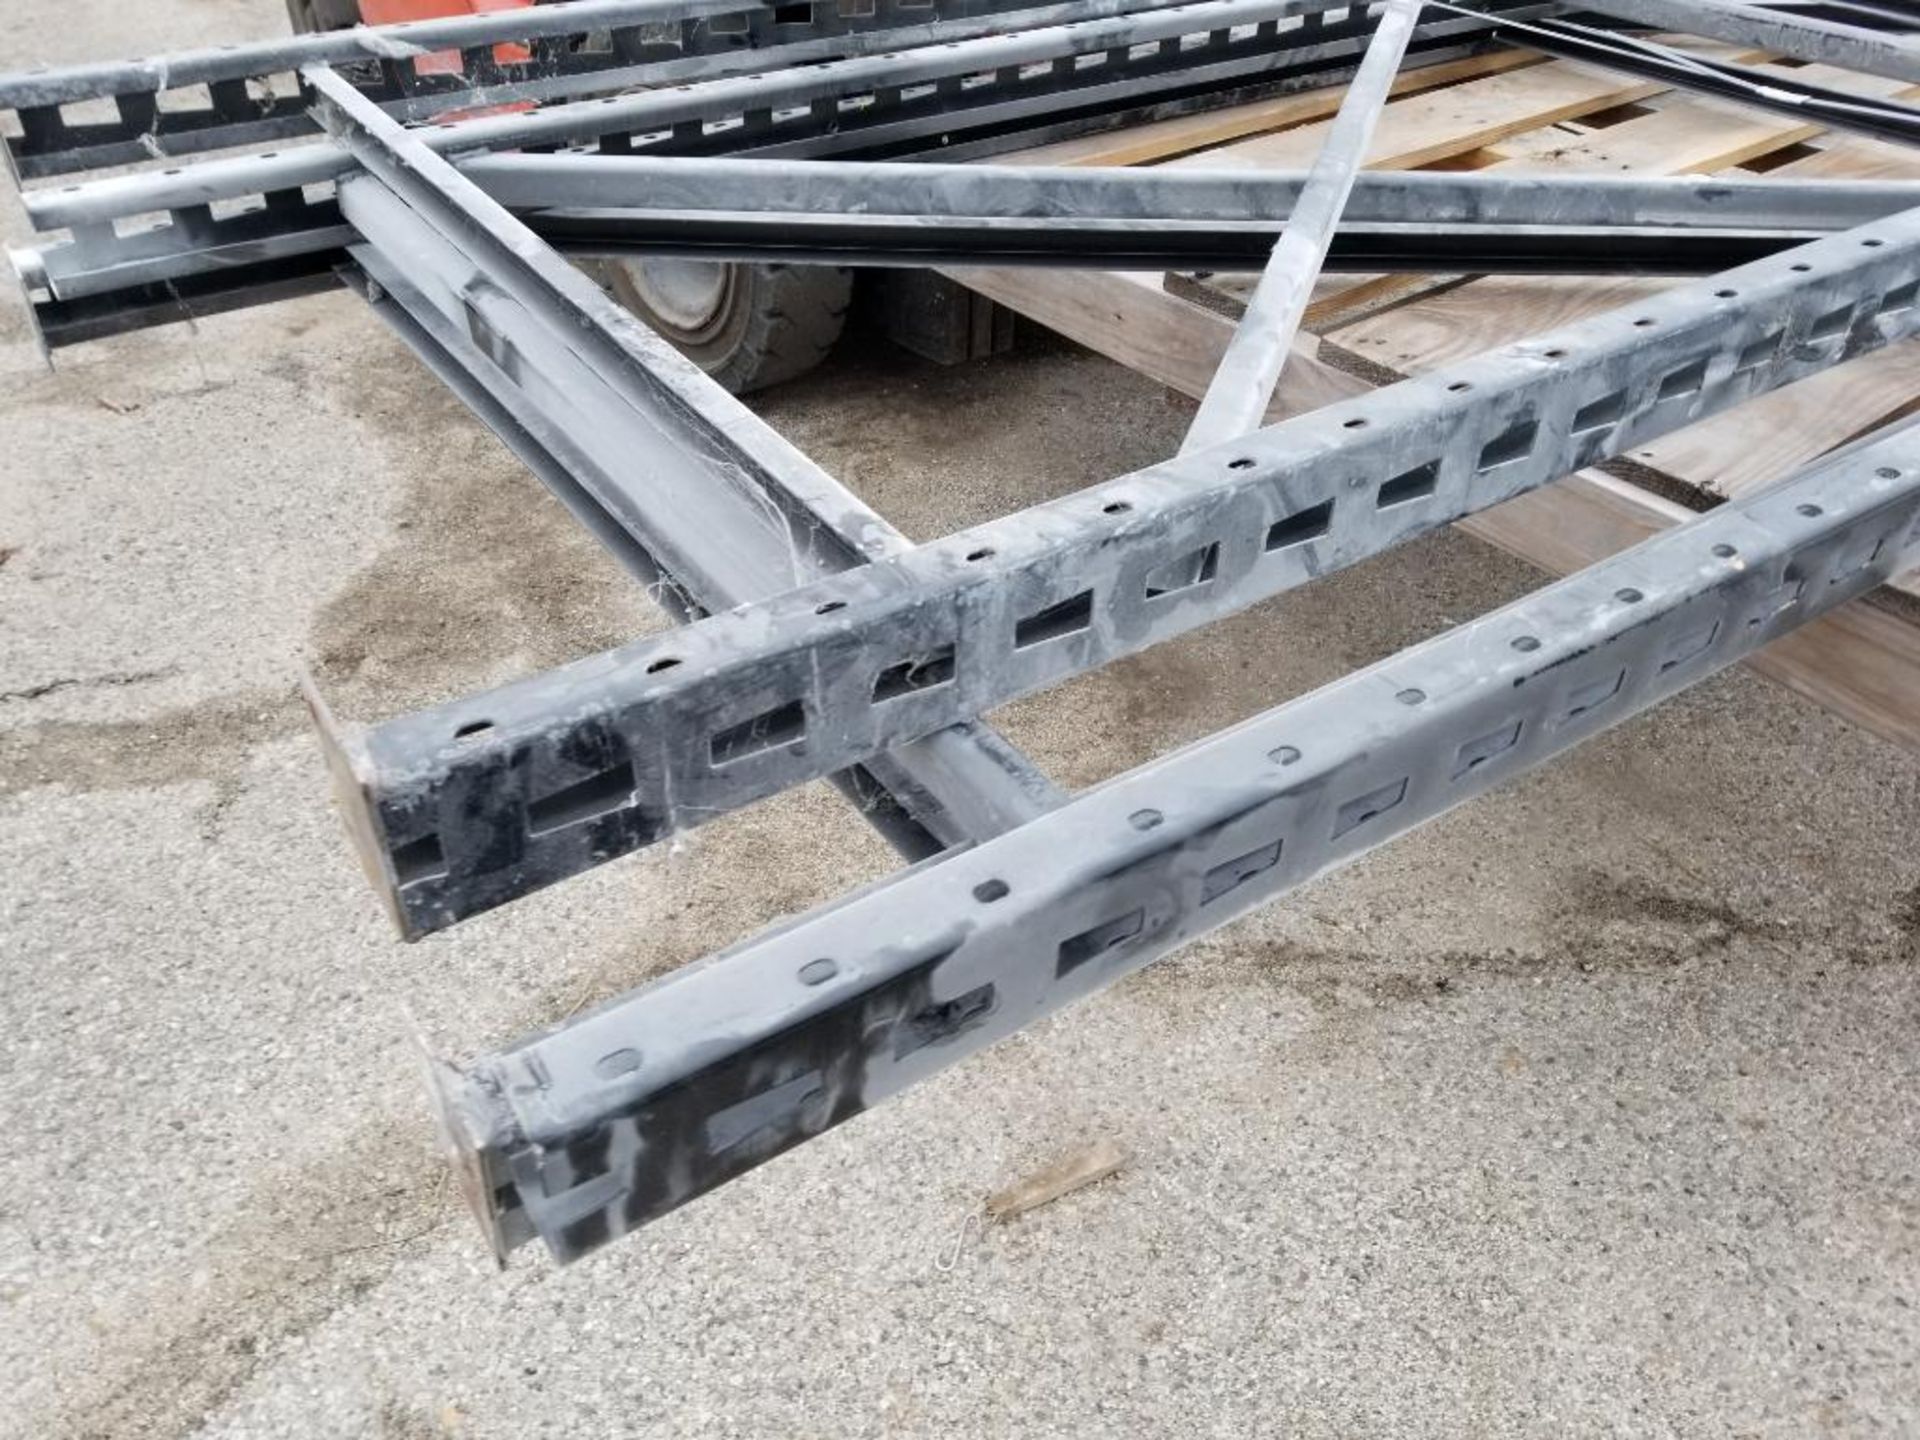 Qty 3 - Pallet racking uprights. 144in tall x 42in wide. - Image 6 of 6